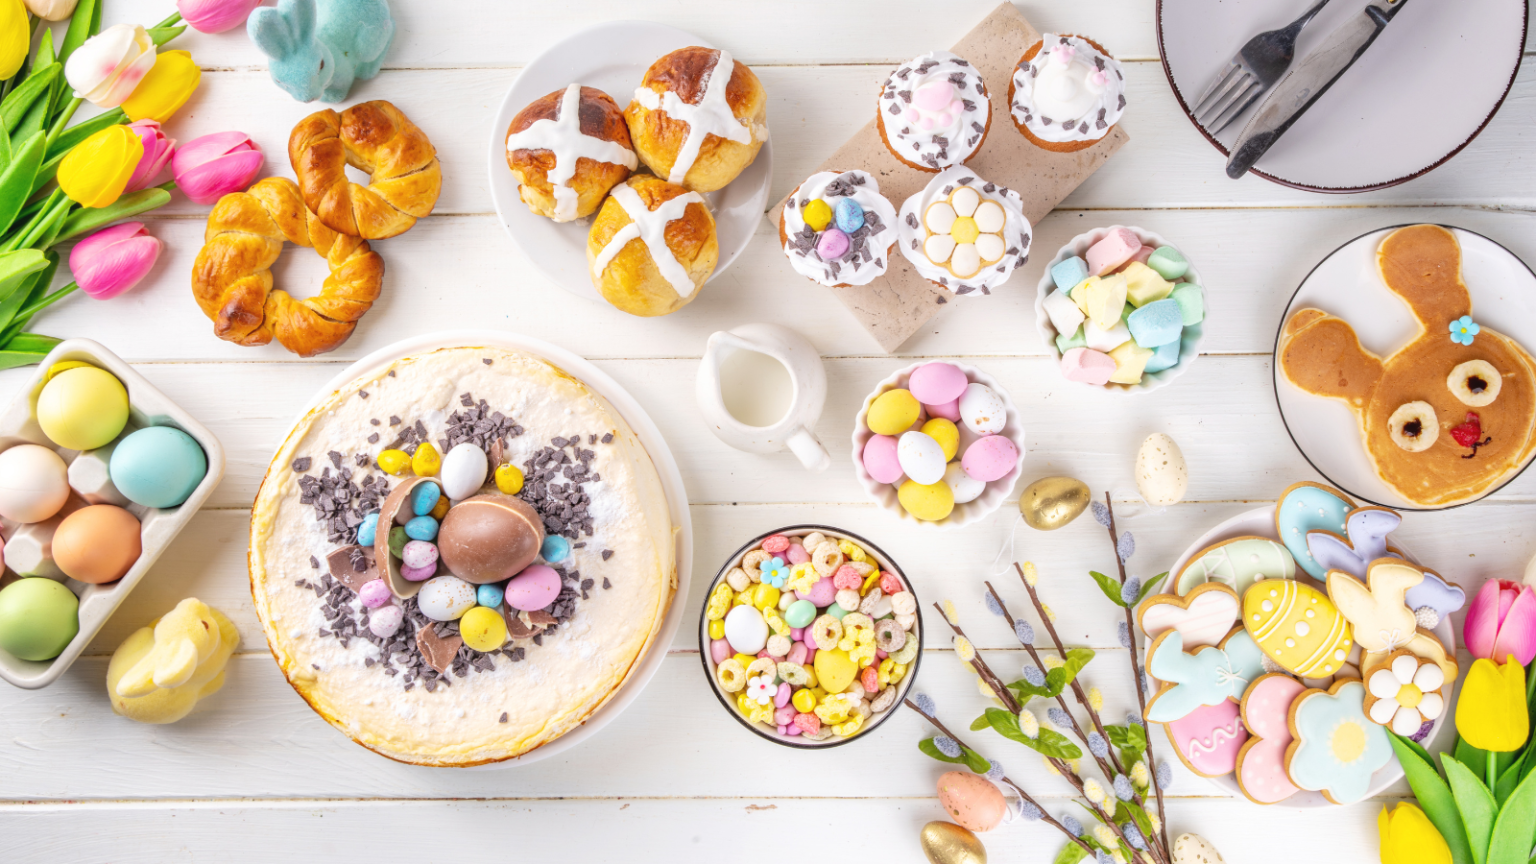 6 Fun and Easy Easter Appetizers for Kids - LavandaMichelle